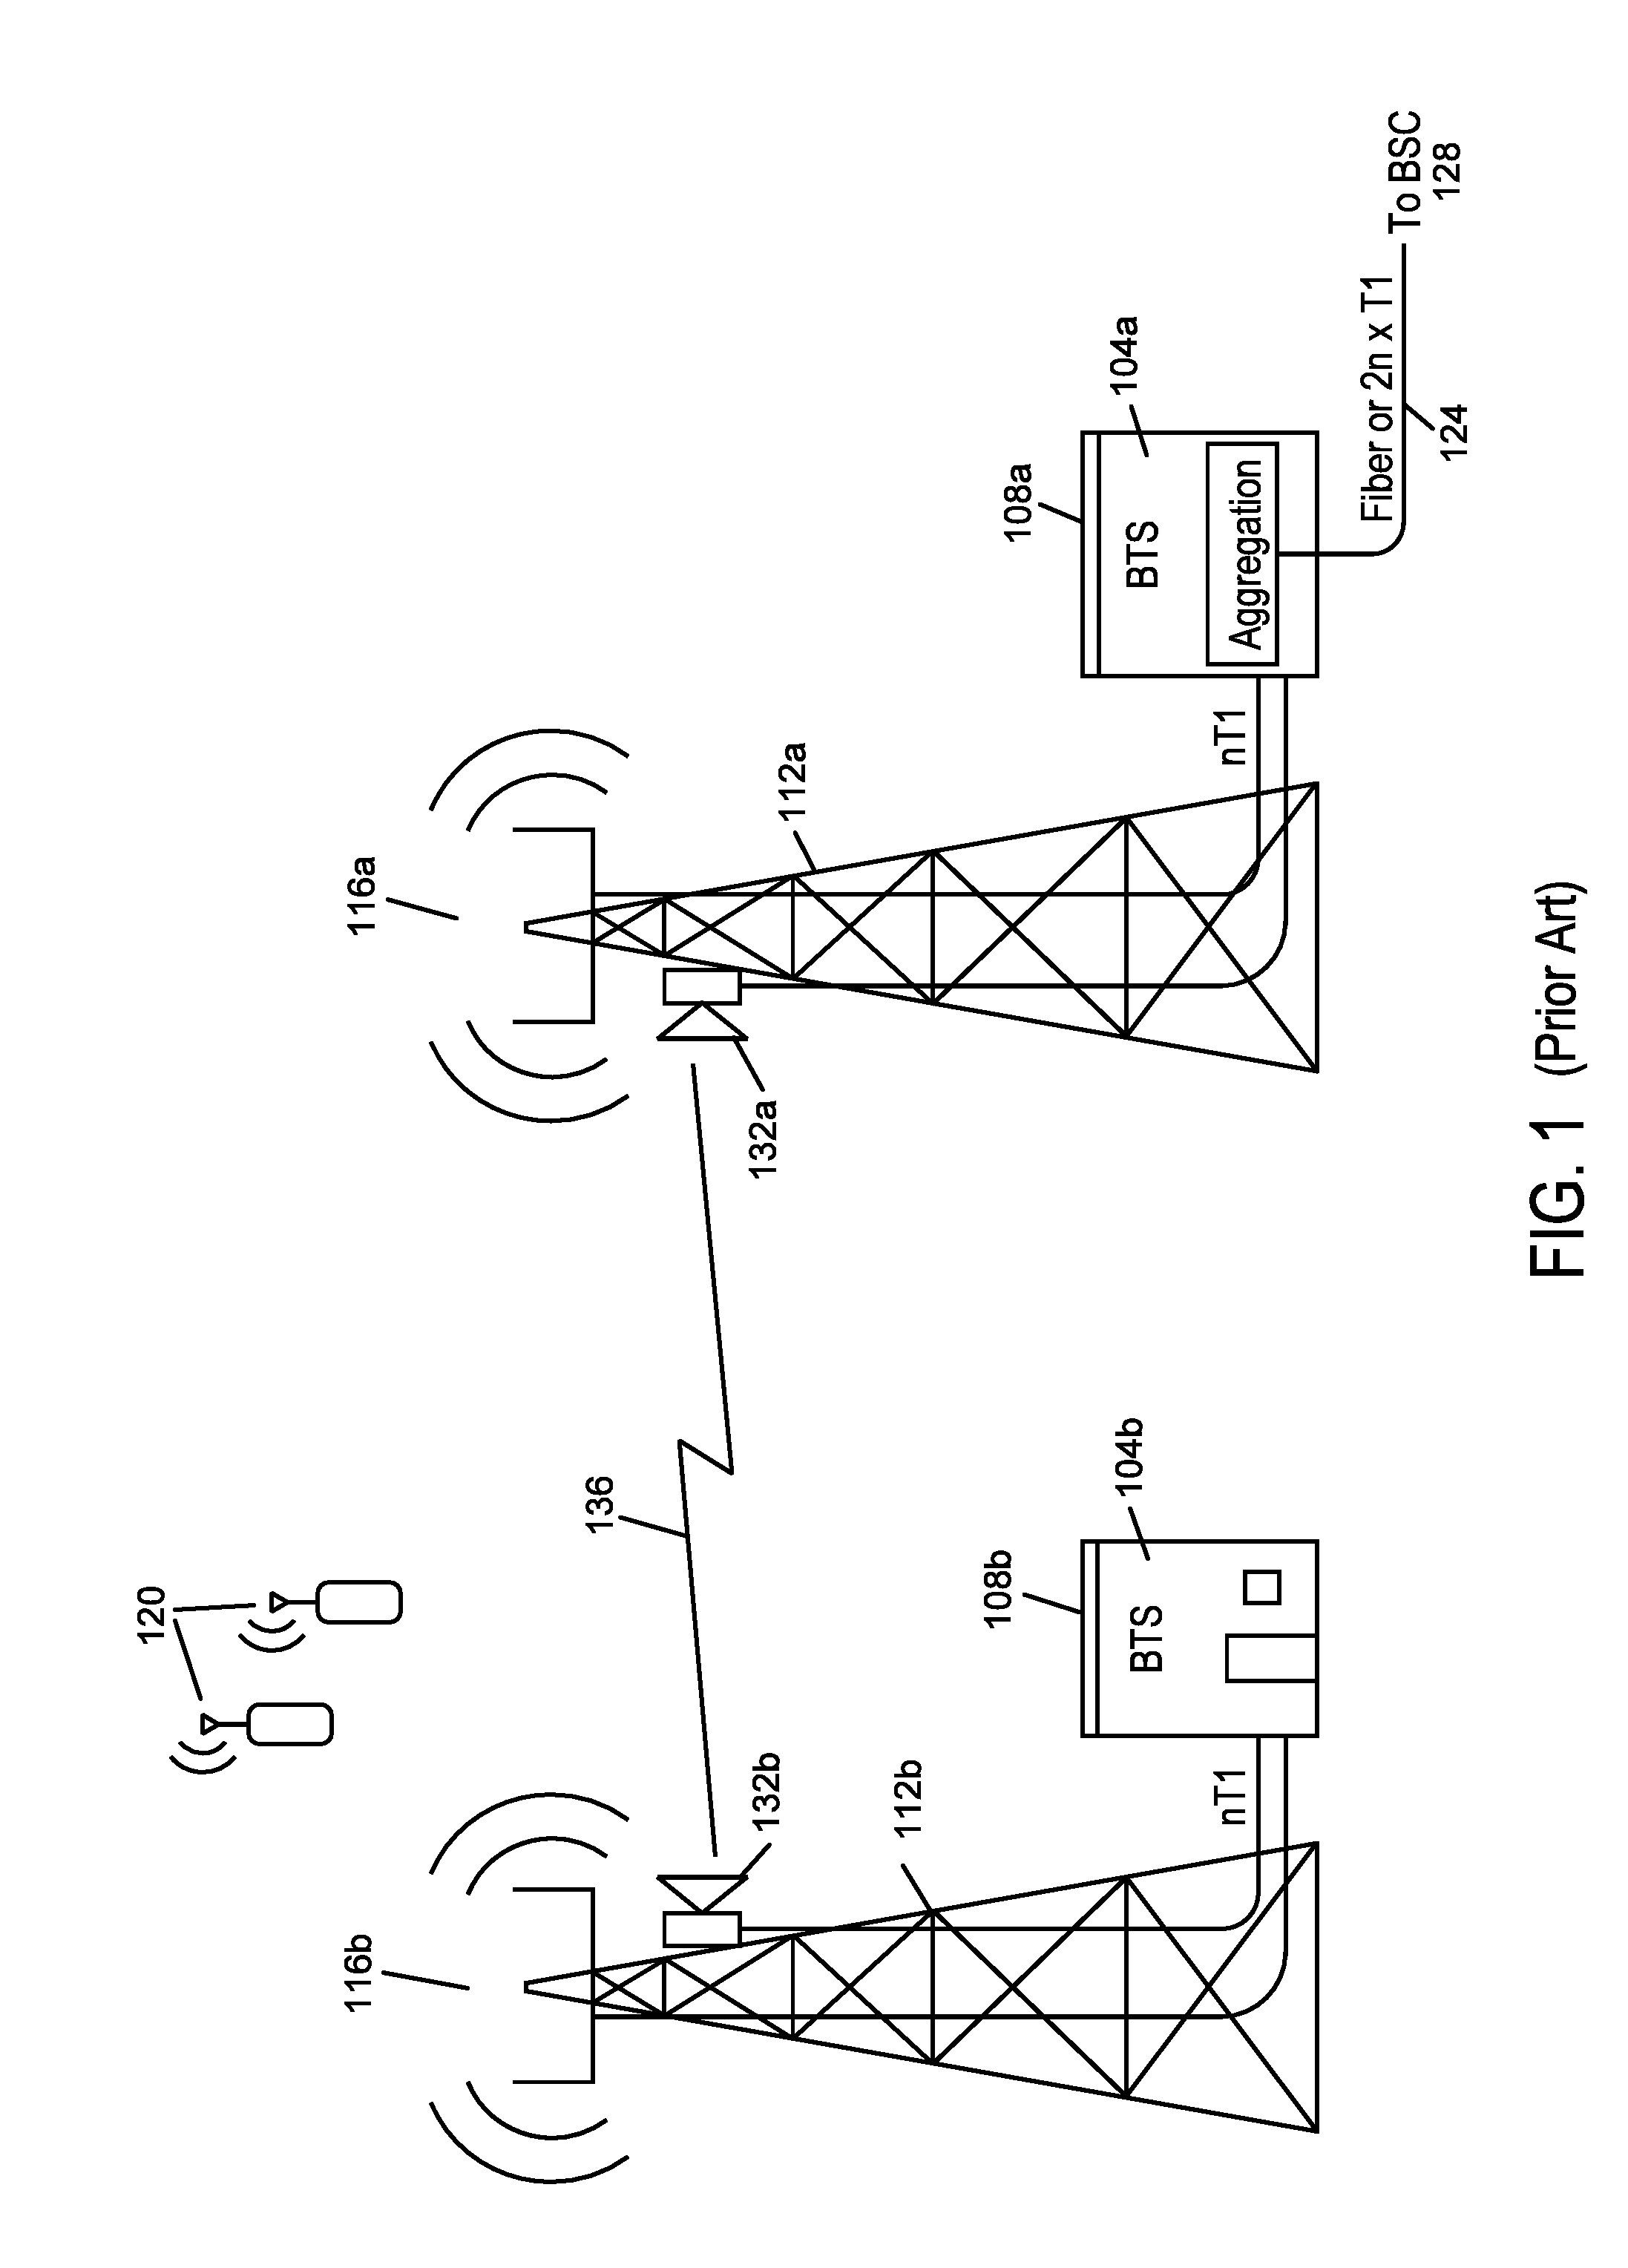 Backhaul radio with an aperture-fed antenna assembly